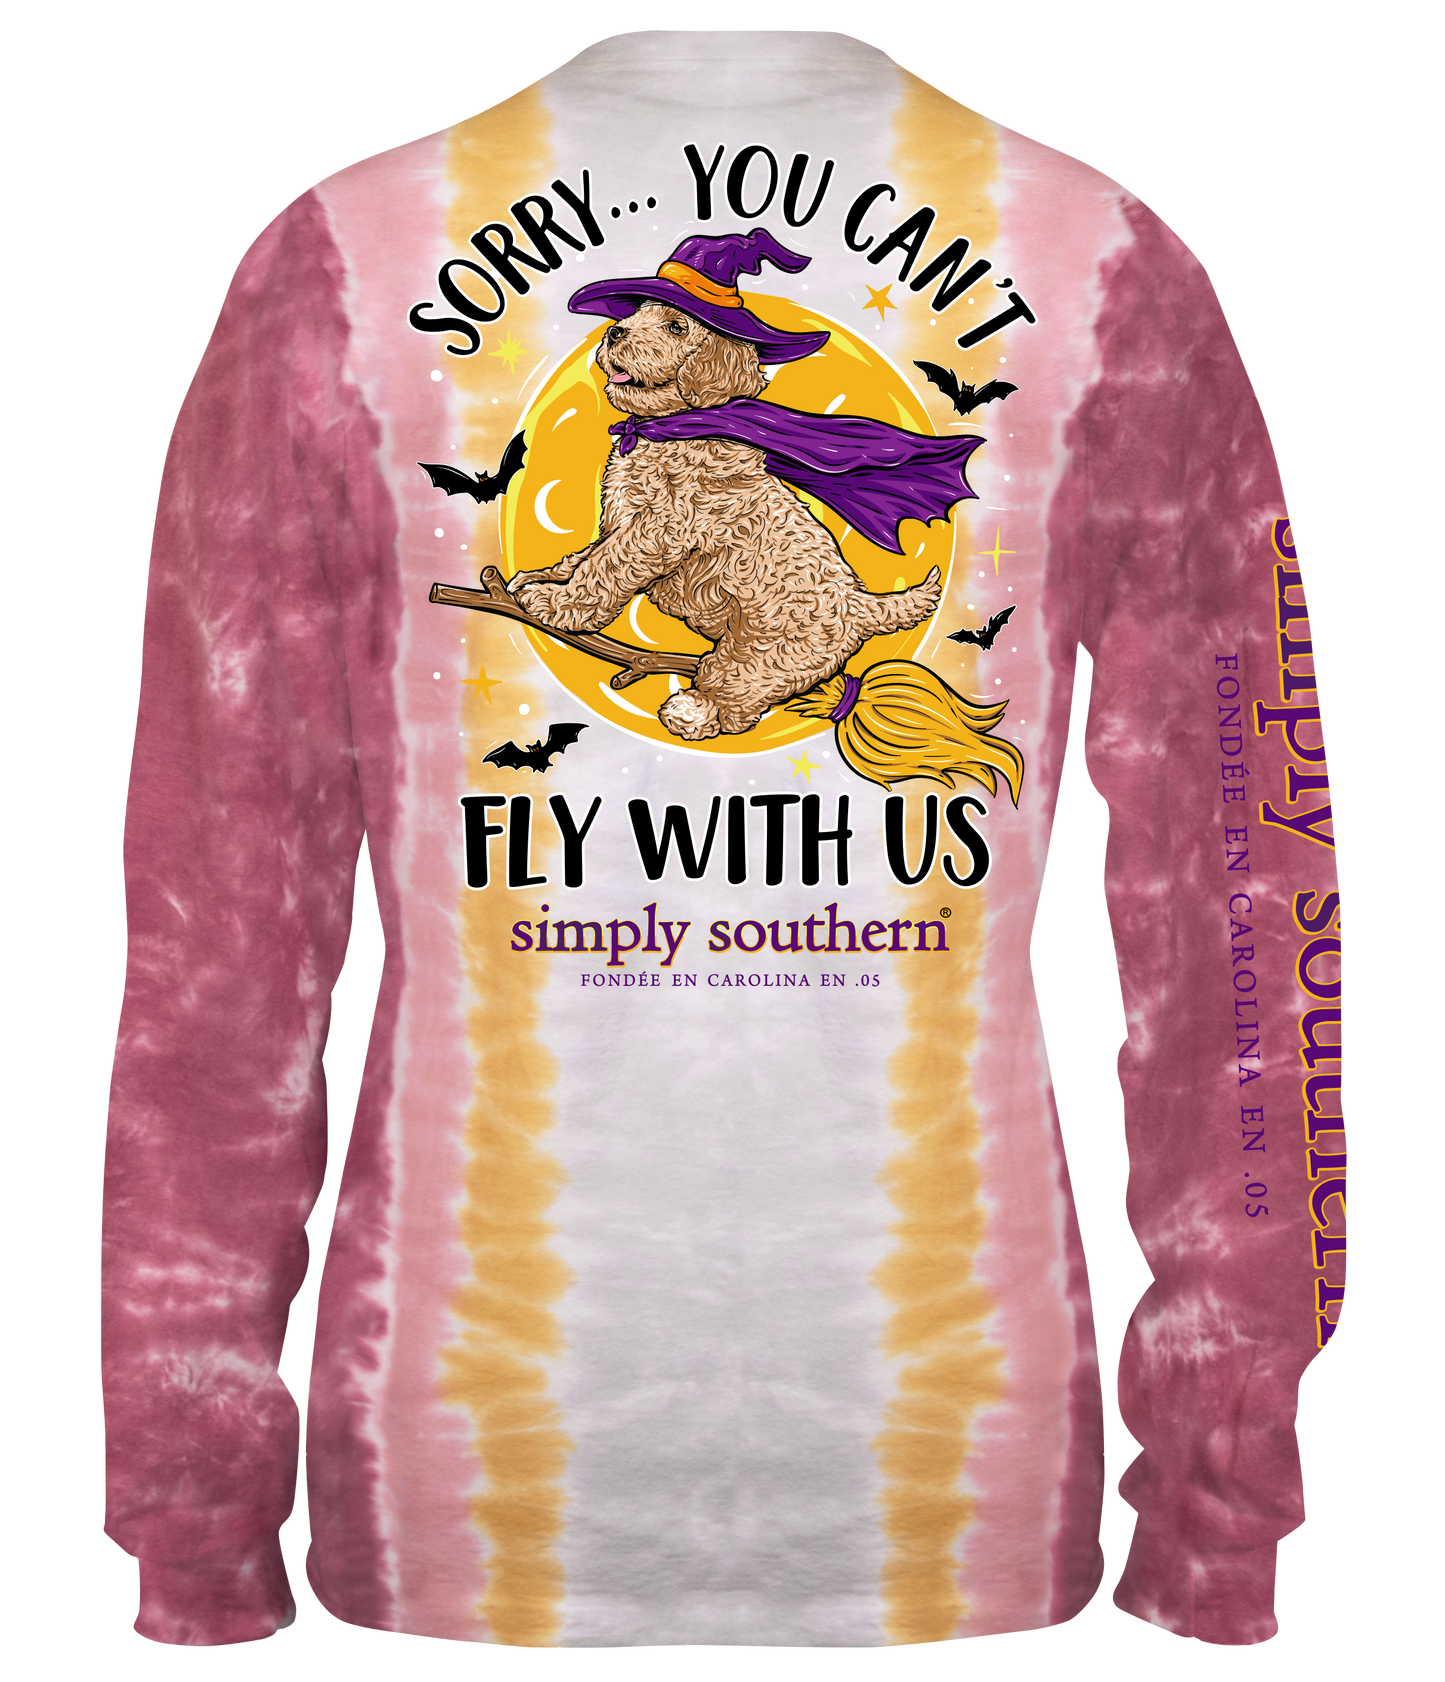 "Sorry, You Can't Fly With Us" Long Sleeve shirt